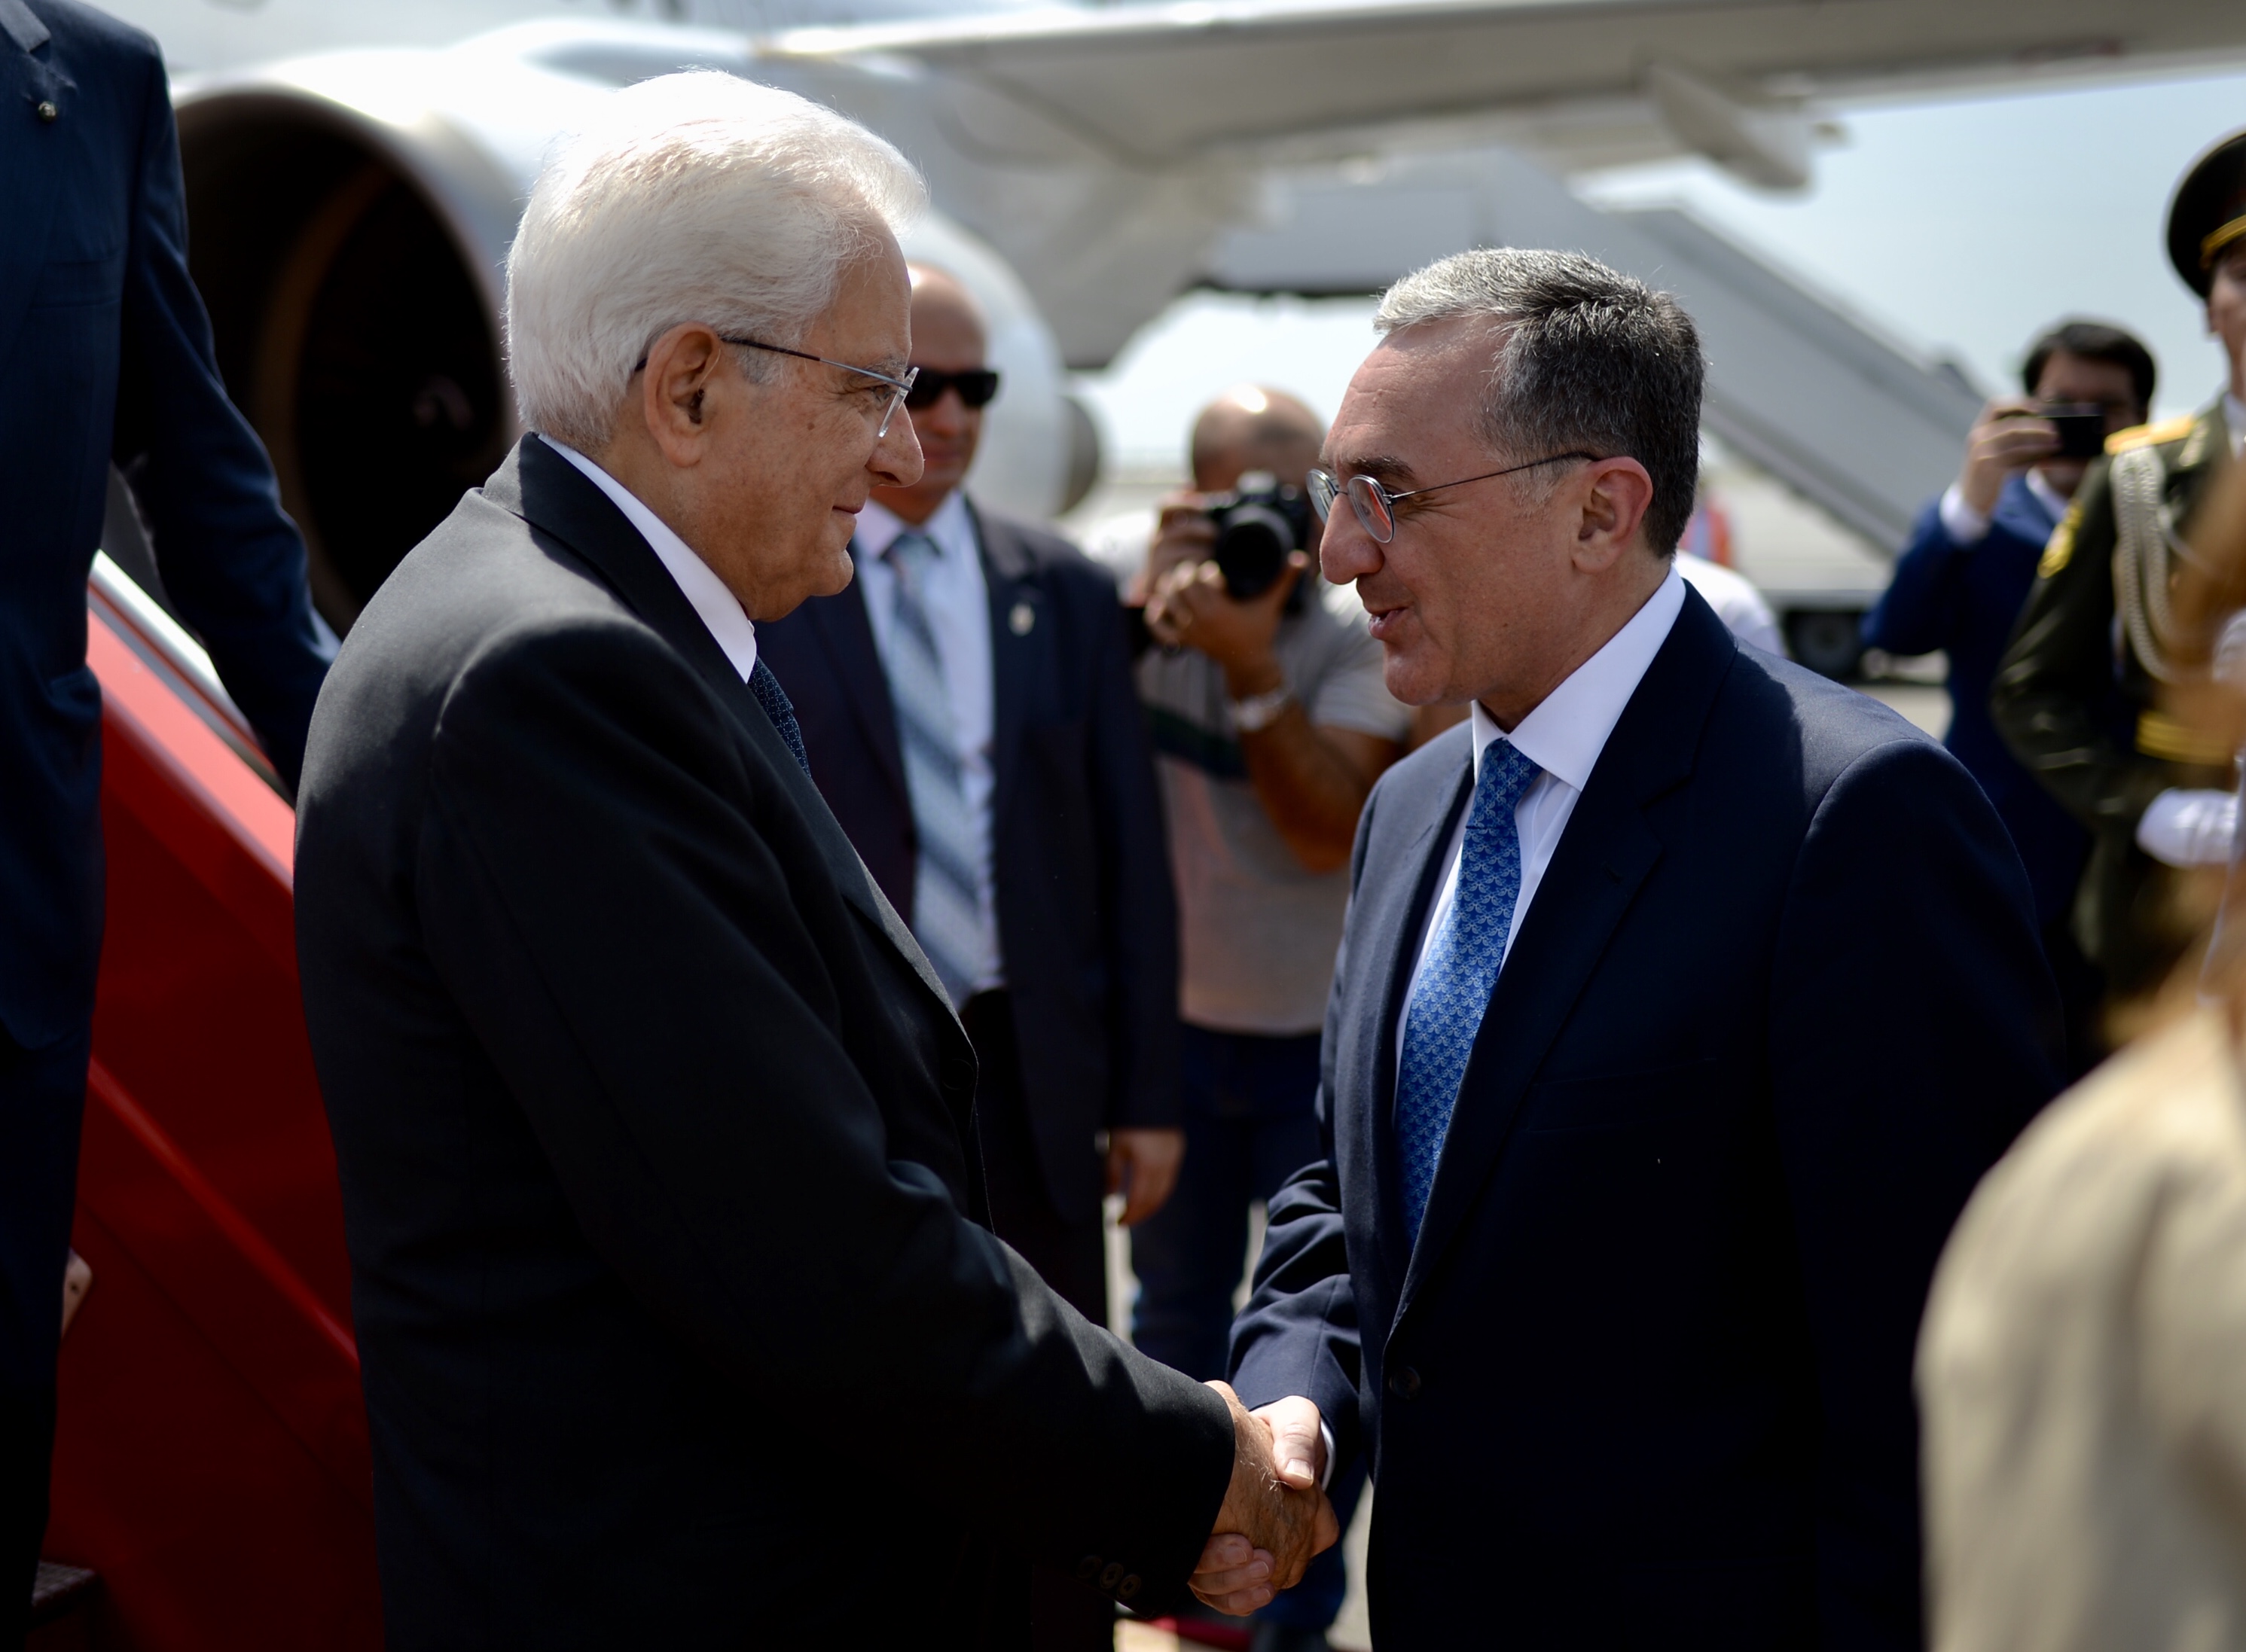 President of Italy Sergio Mattarella has arrived to Armenia on a state visit